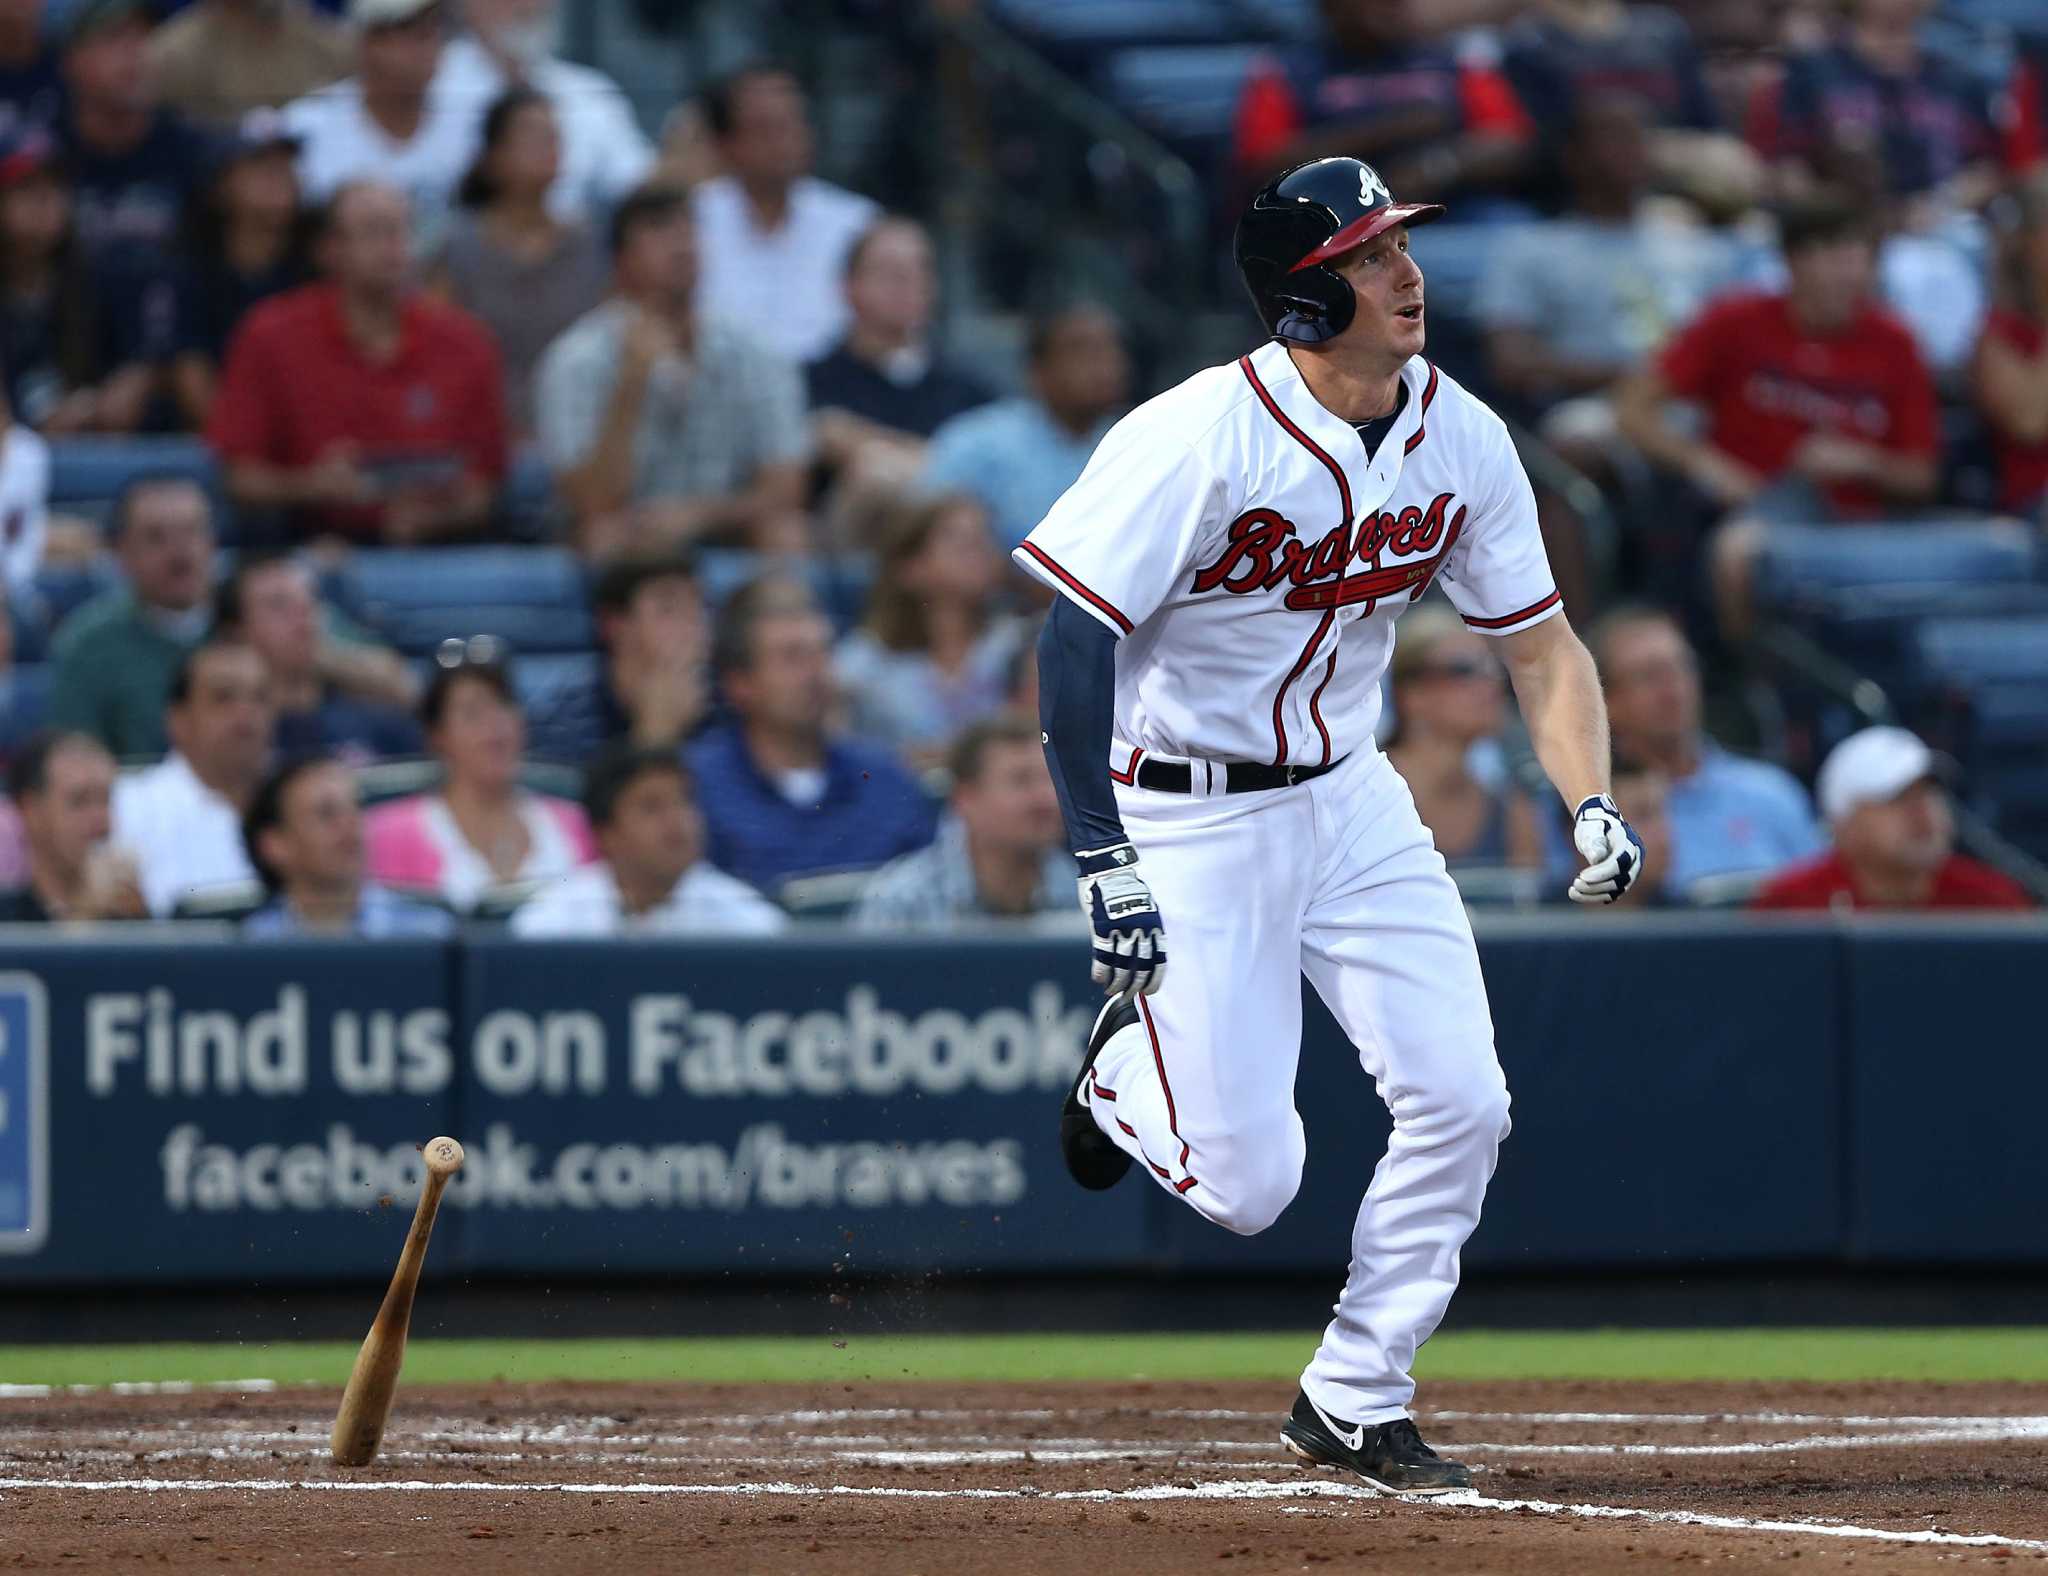 McCann's bases-loaded walk lifts Braves past Cardinals in 10